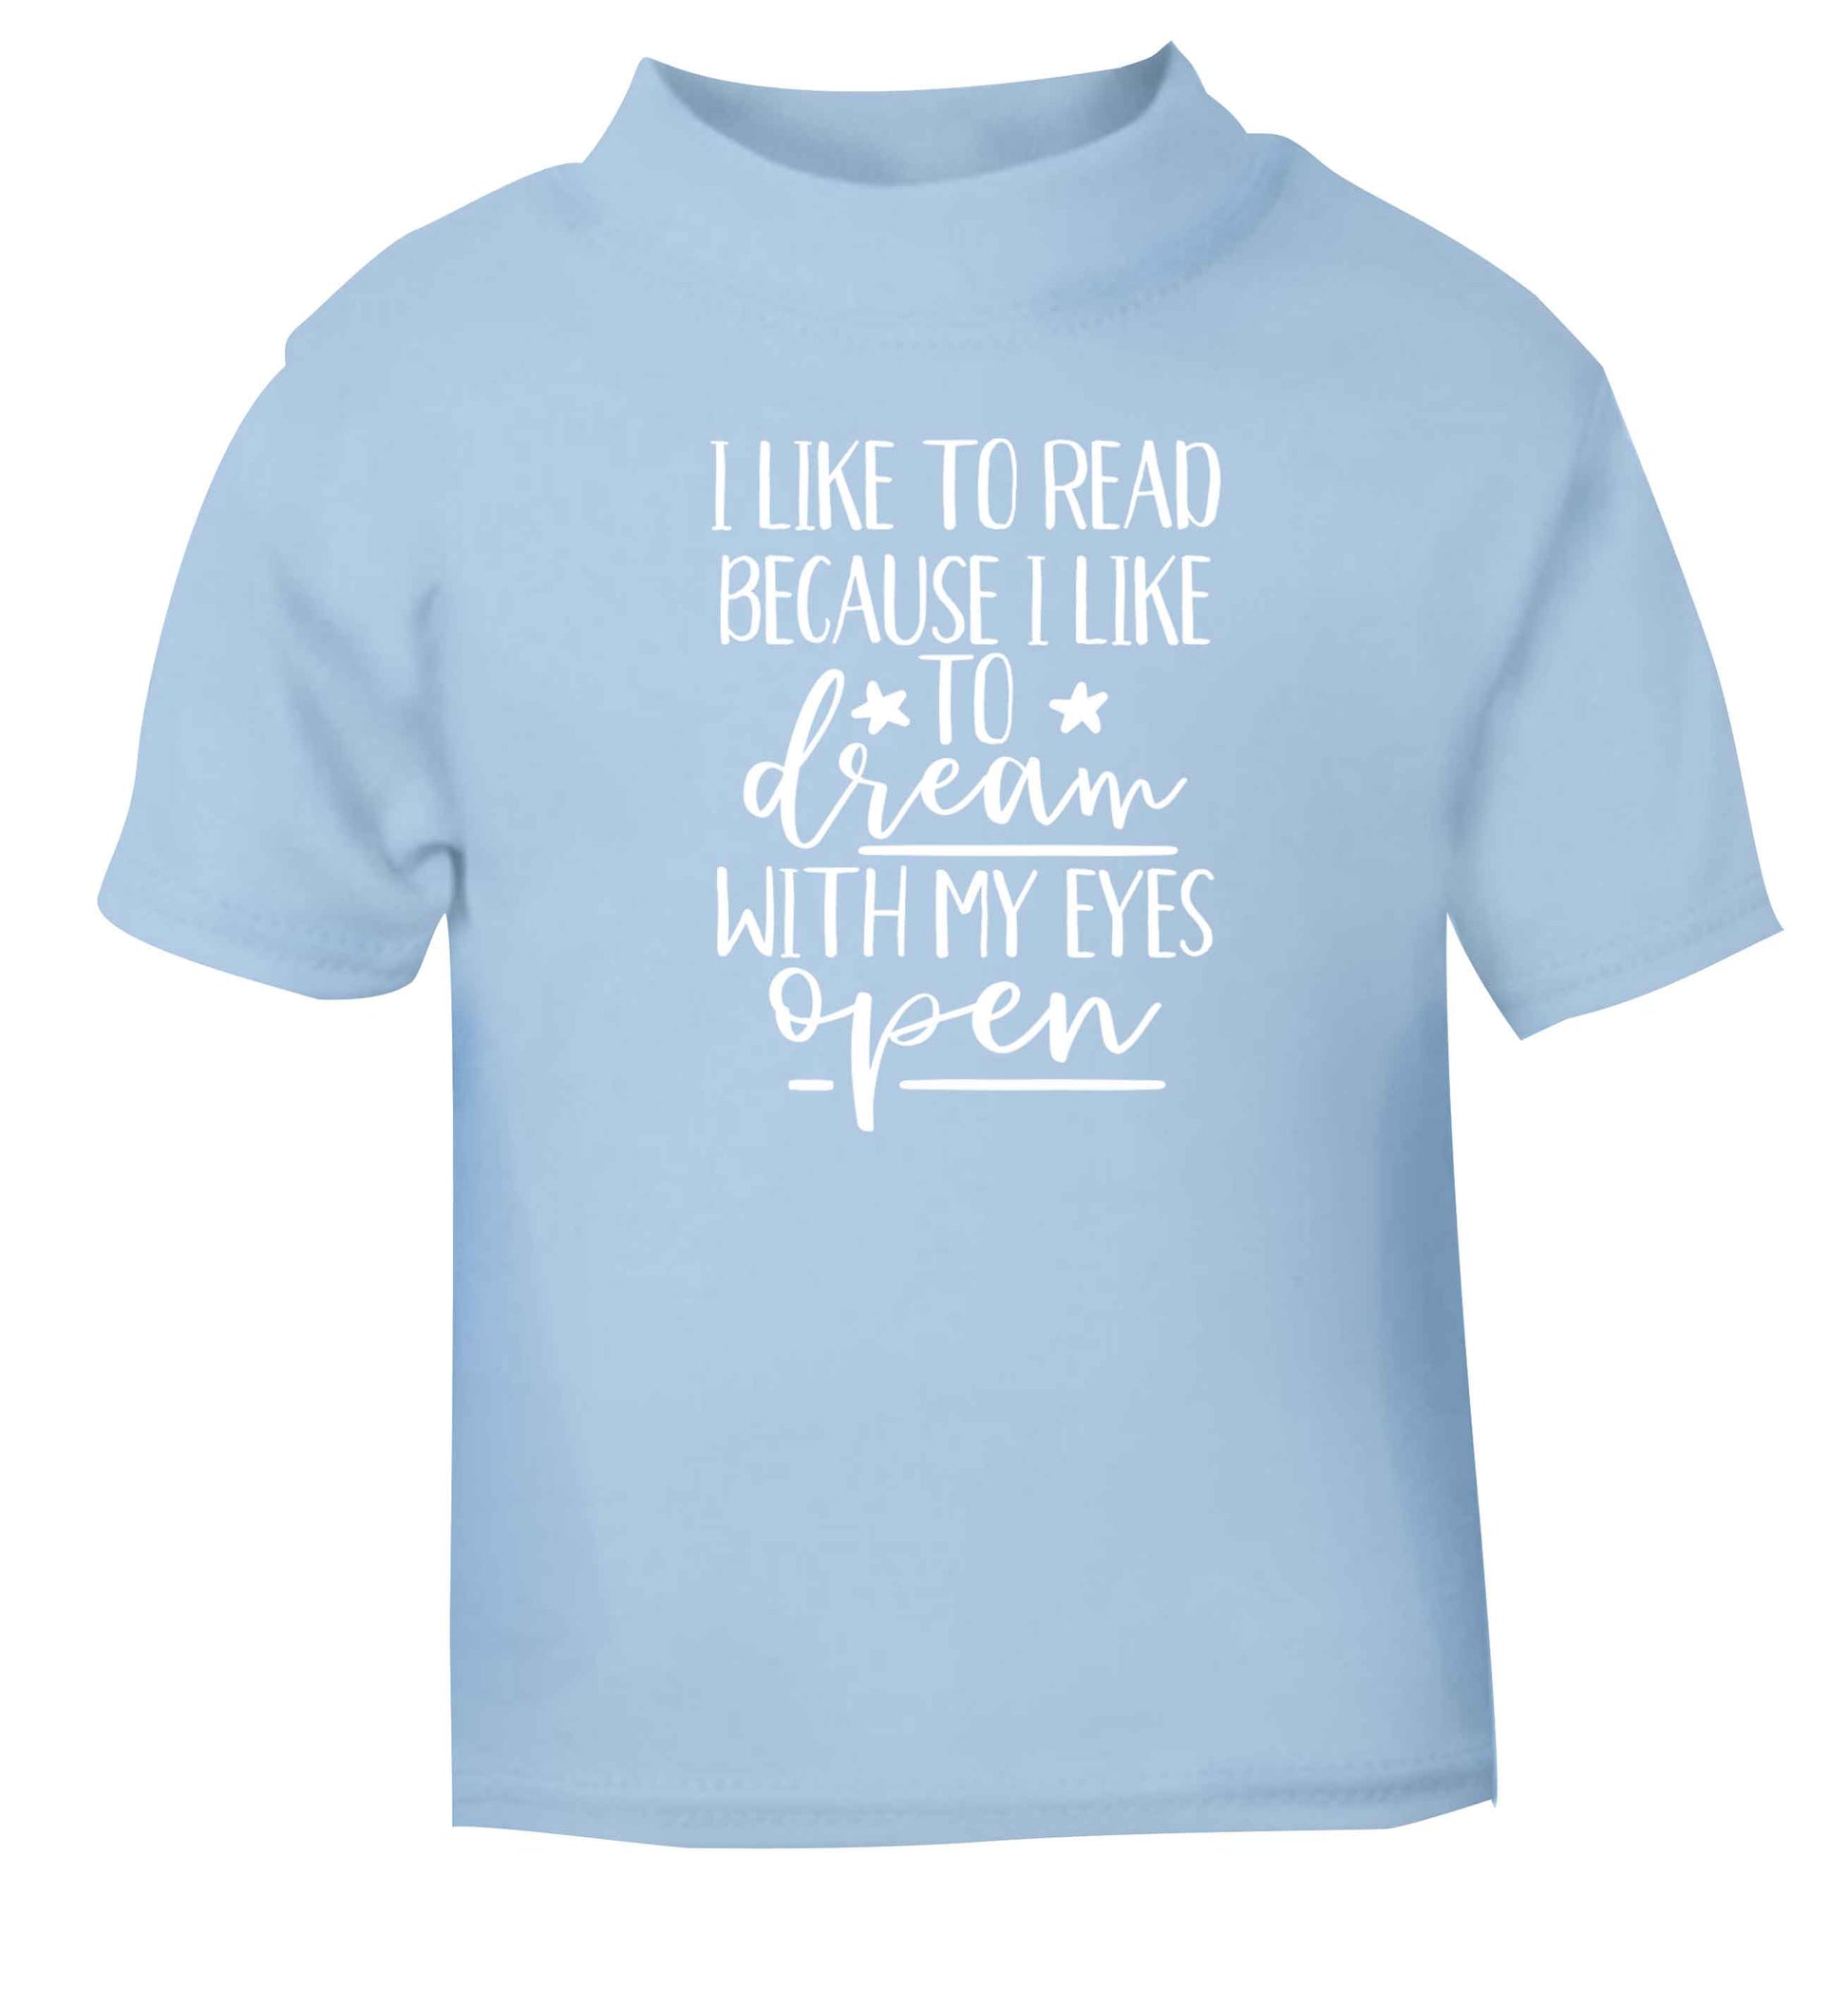 I like to read because I like to dream with my eyes open light blue Baby Toddler Tshirt 2 Years